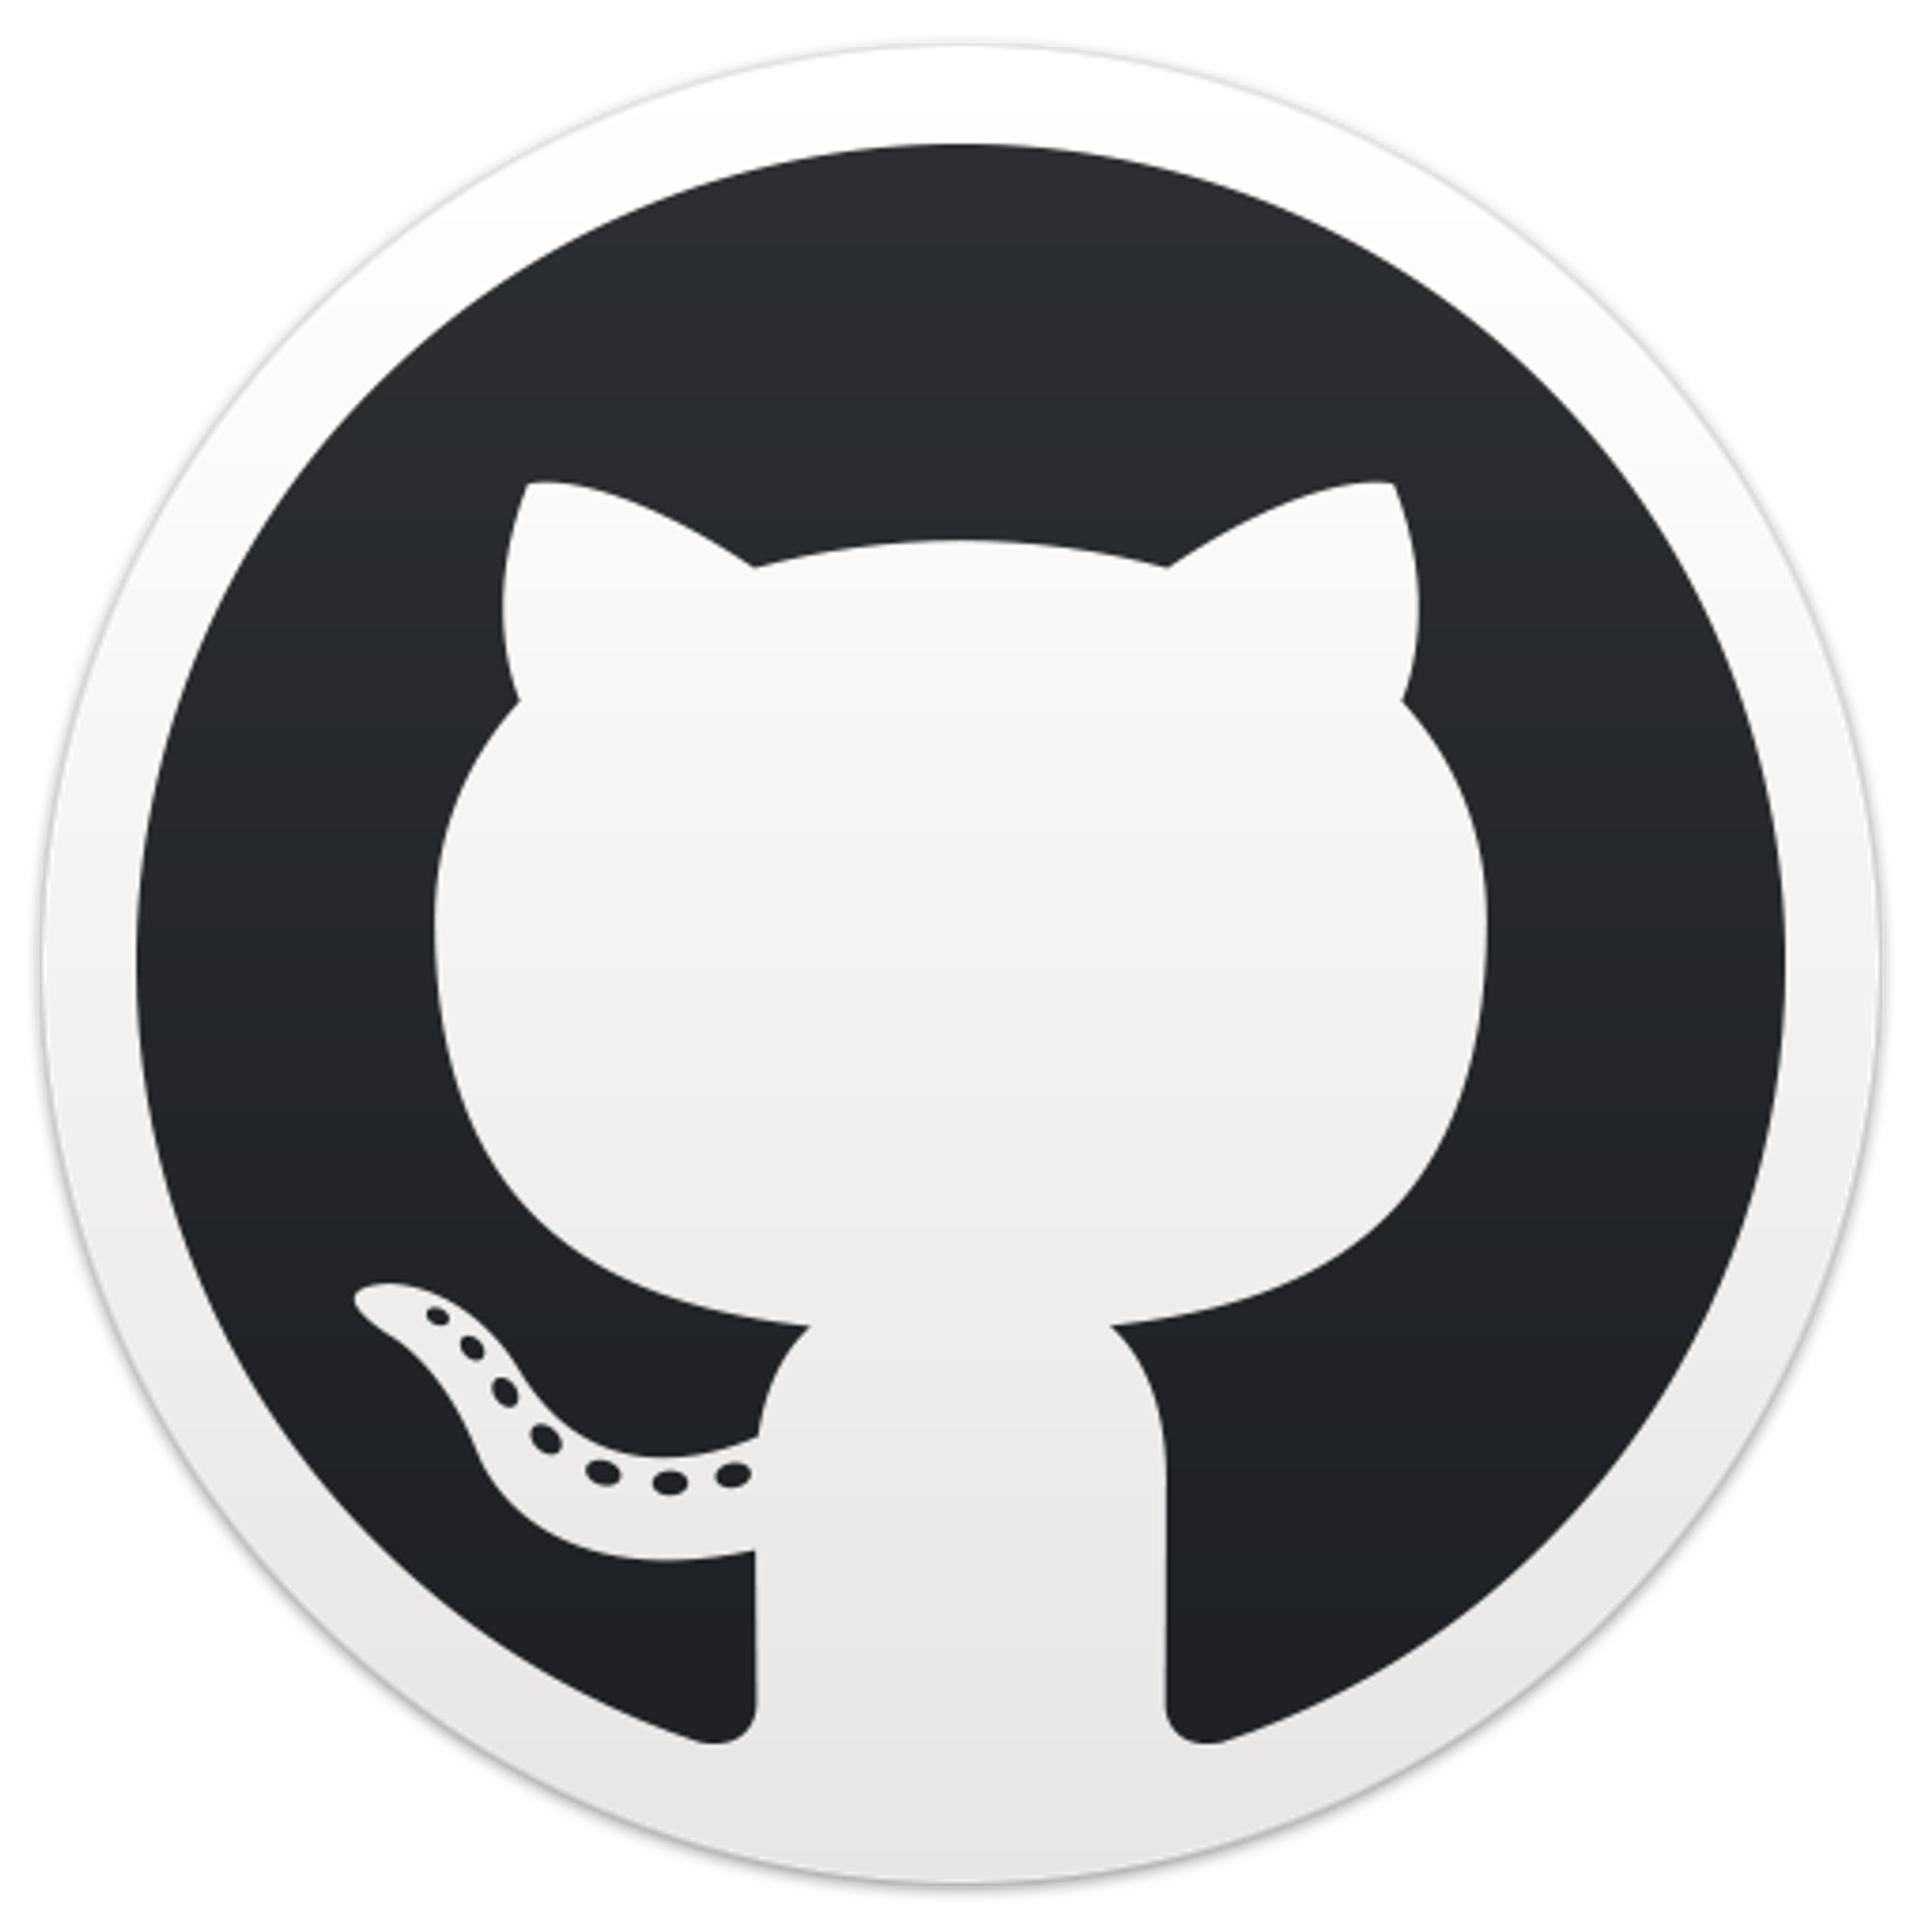 GitHub - hiskiapp/pilkatos: Manage Student Council Chair Elections Quickly and Accurately.